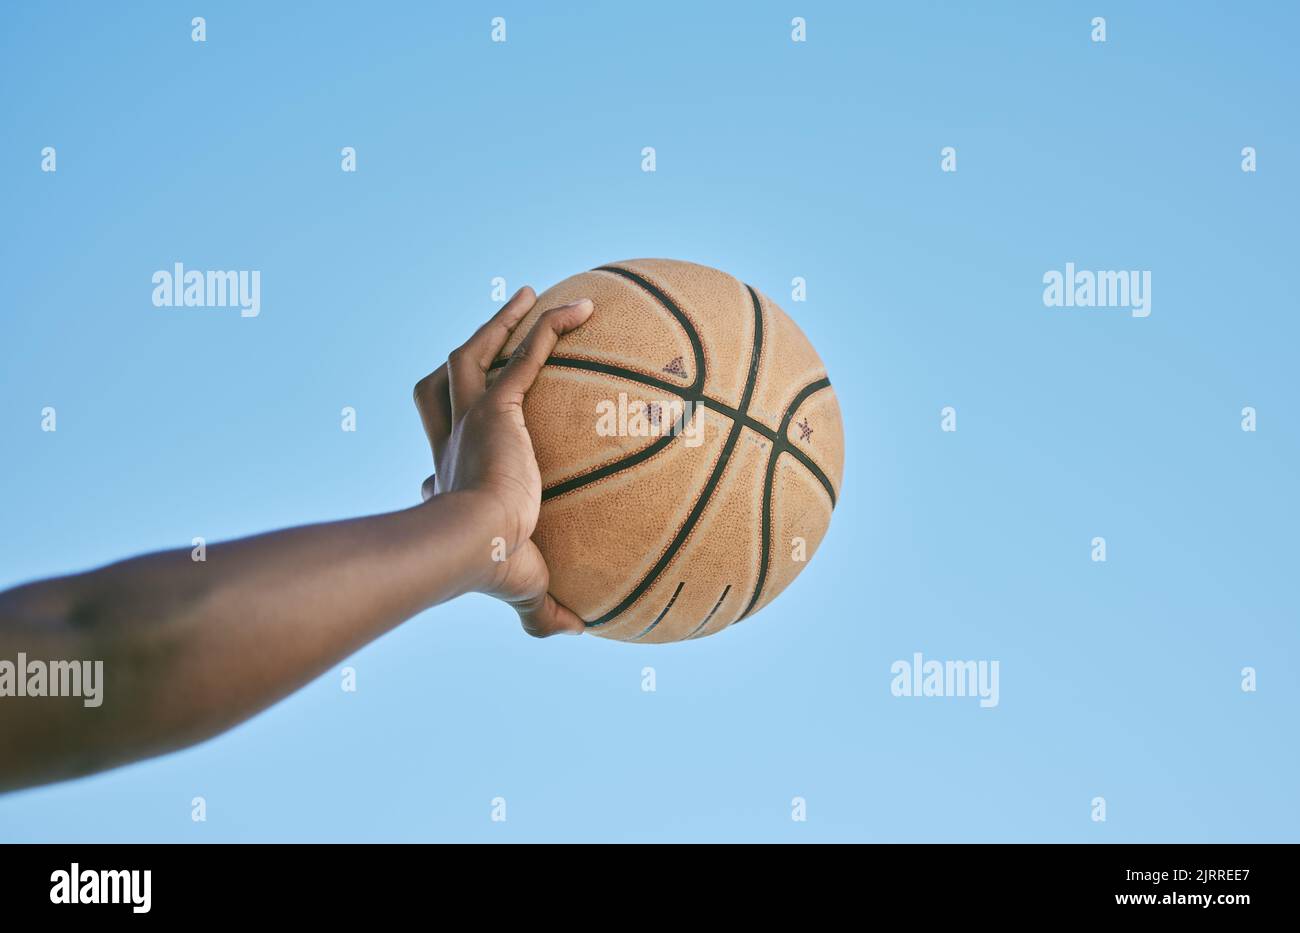 Basketball, active and sports man hand holding ball showing victory, power or athletic fitness from below with blue sky background. Player, black man Stock Photo